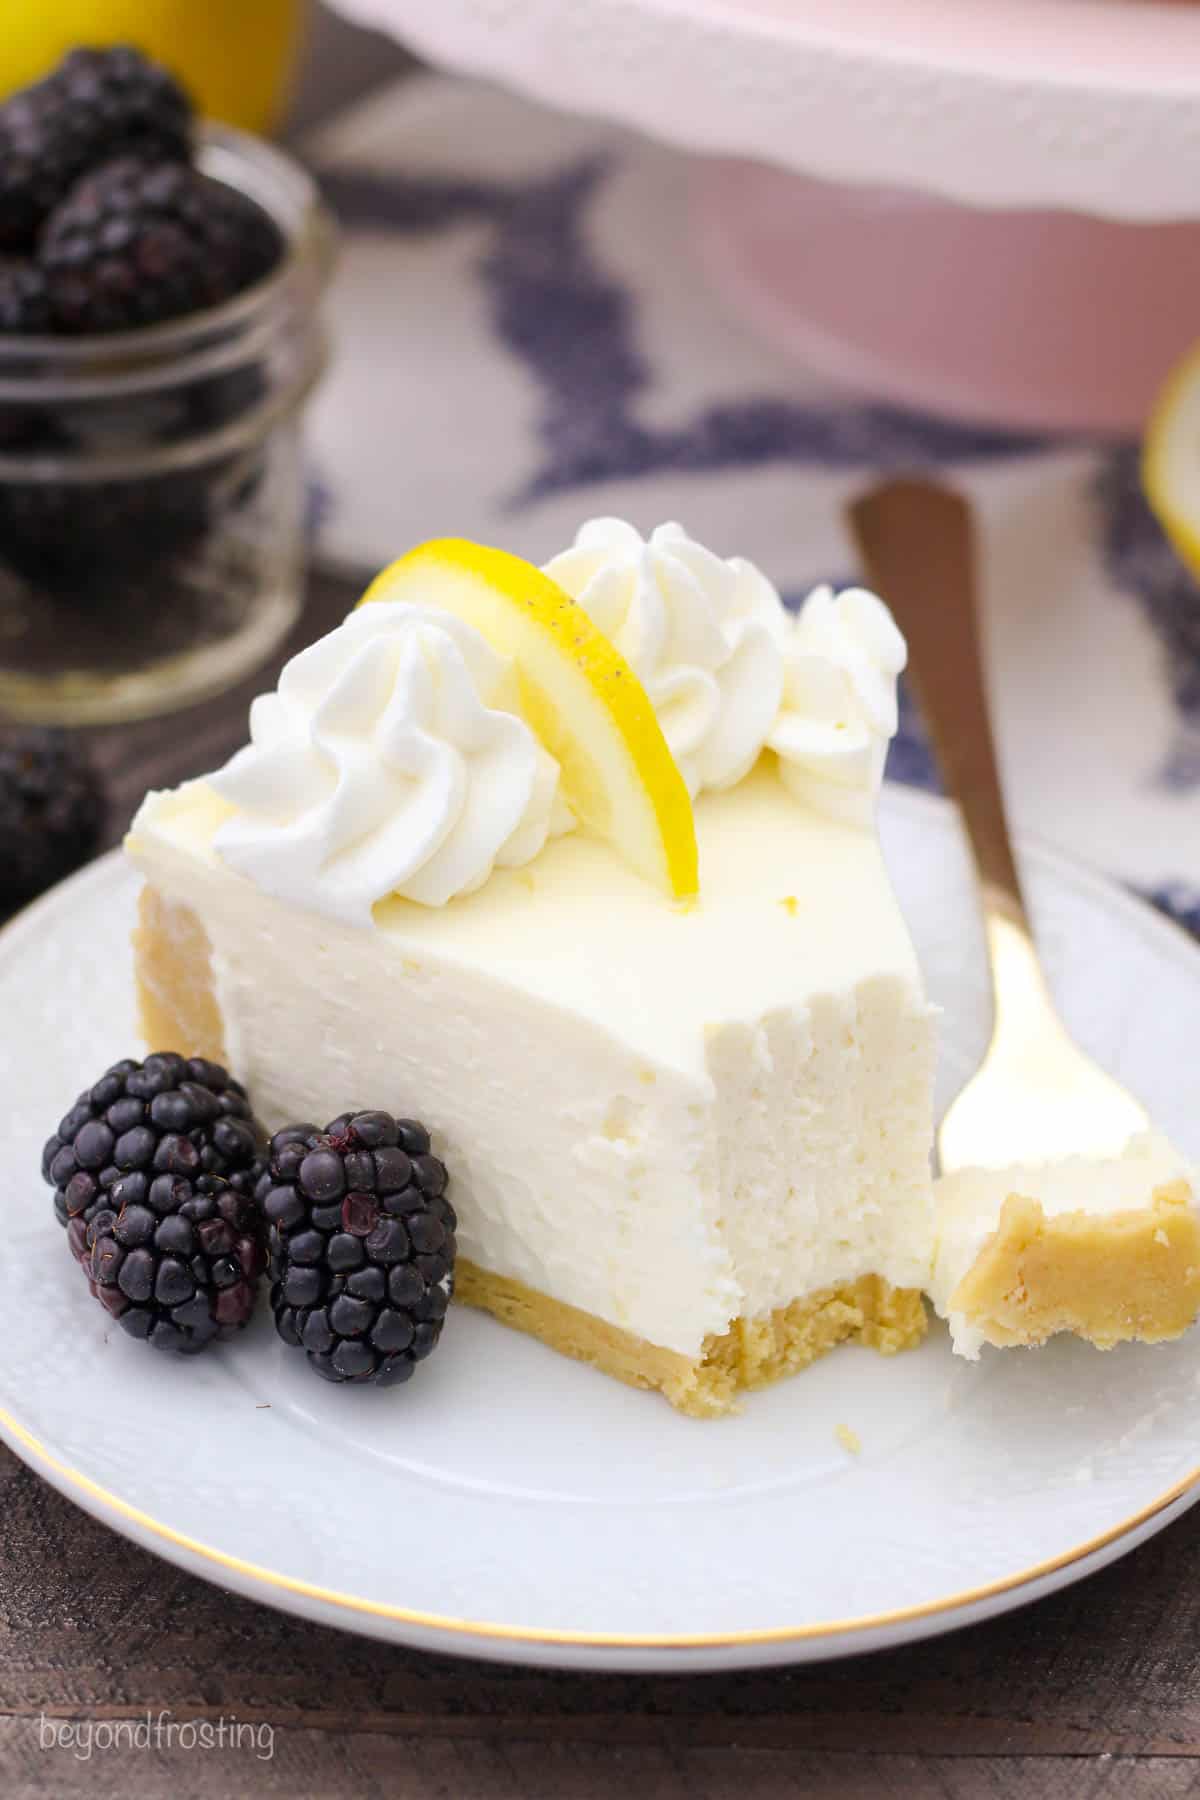 a slice of lemon cheesecake on a gold-rimmed white plate with a bite taken out and blackberries on the side